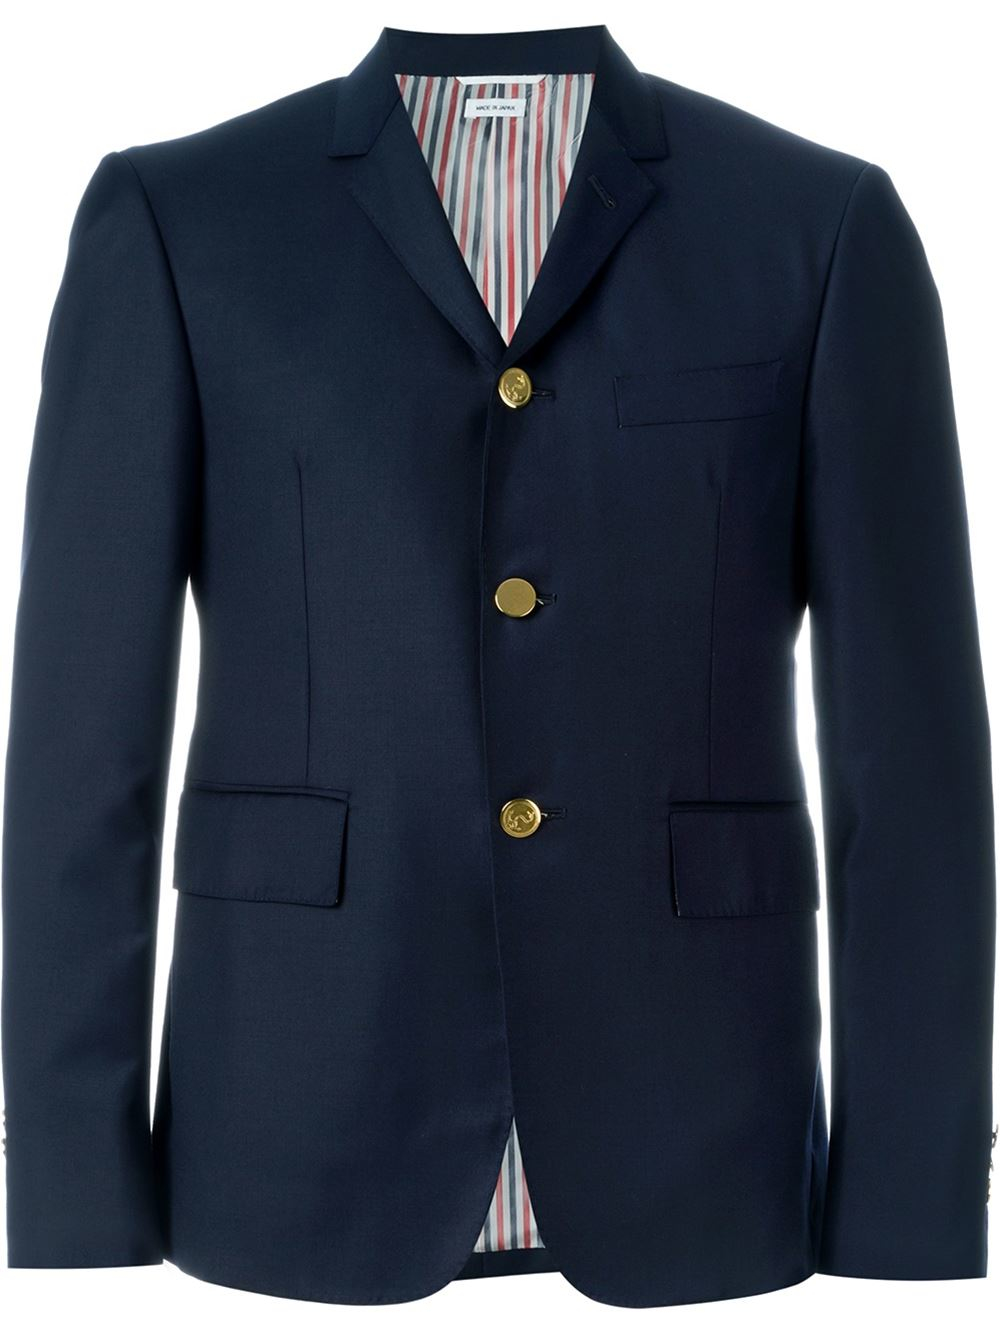 Thom Browne Wool Short Double-breasted Blazer in Blue for Men - Lyst